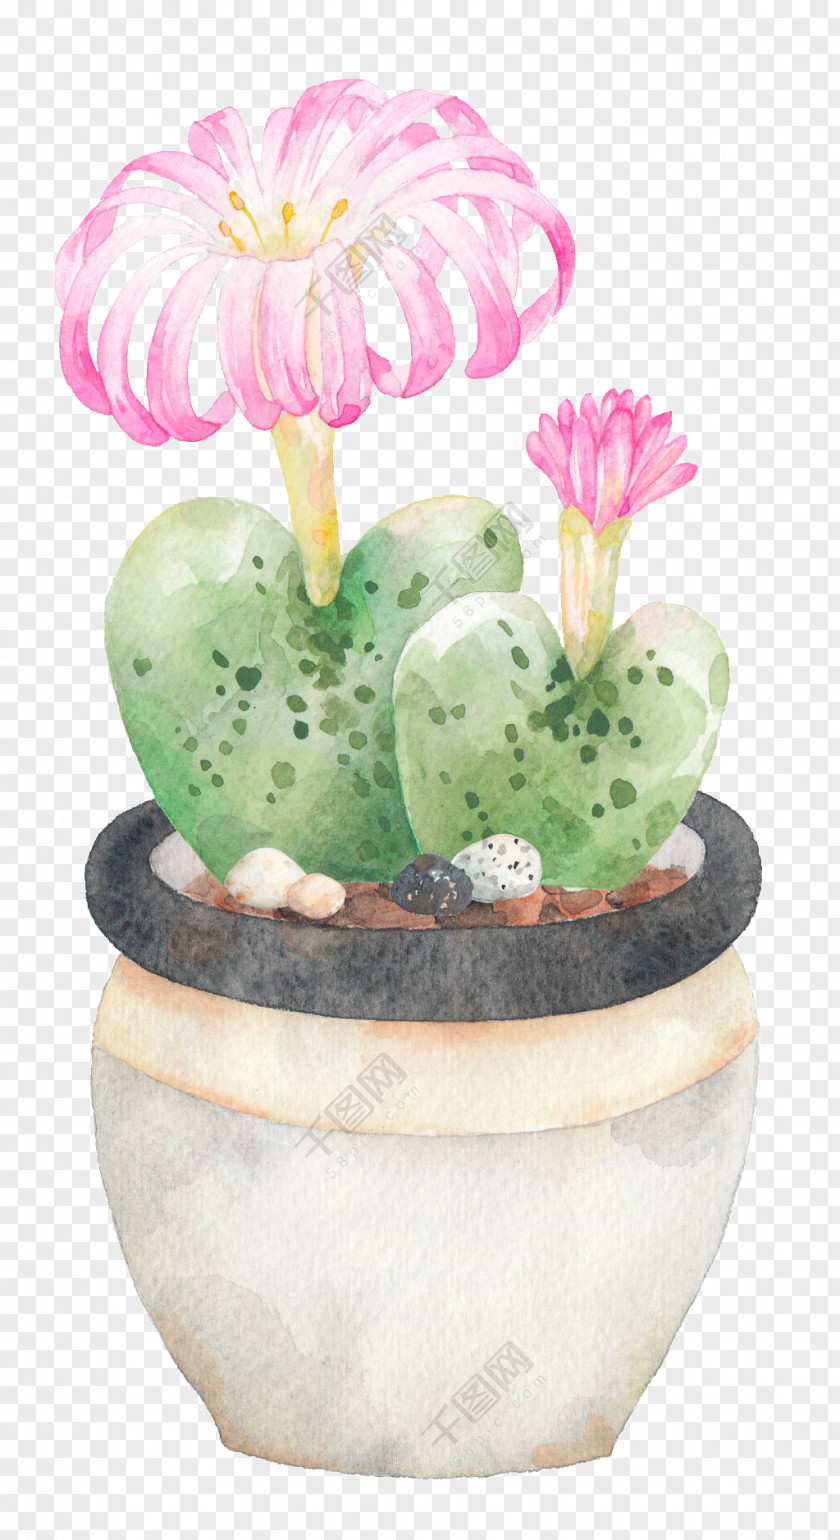 Blooming Cactus Vector Graphics Graphic Design Image PNG